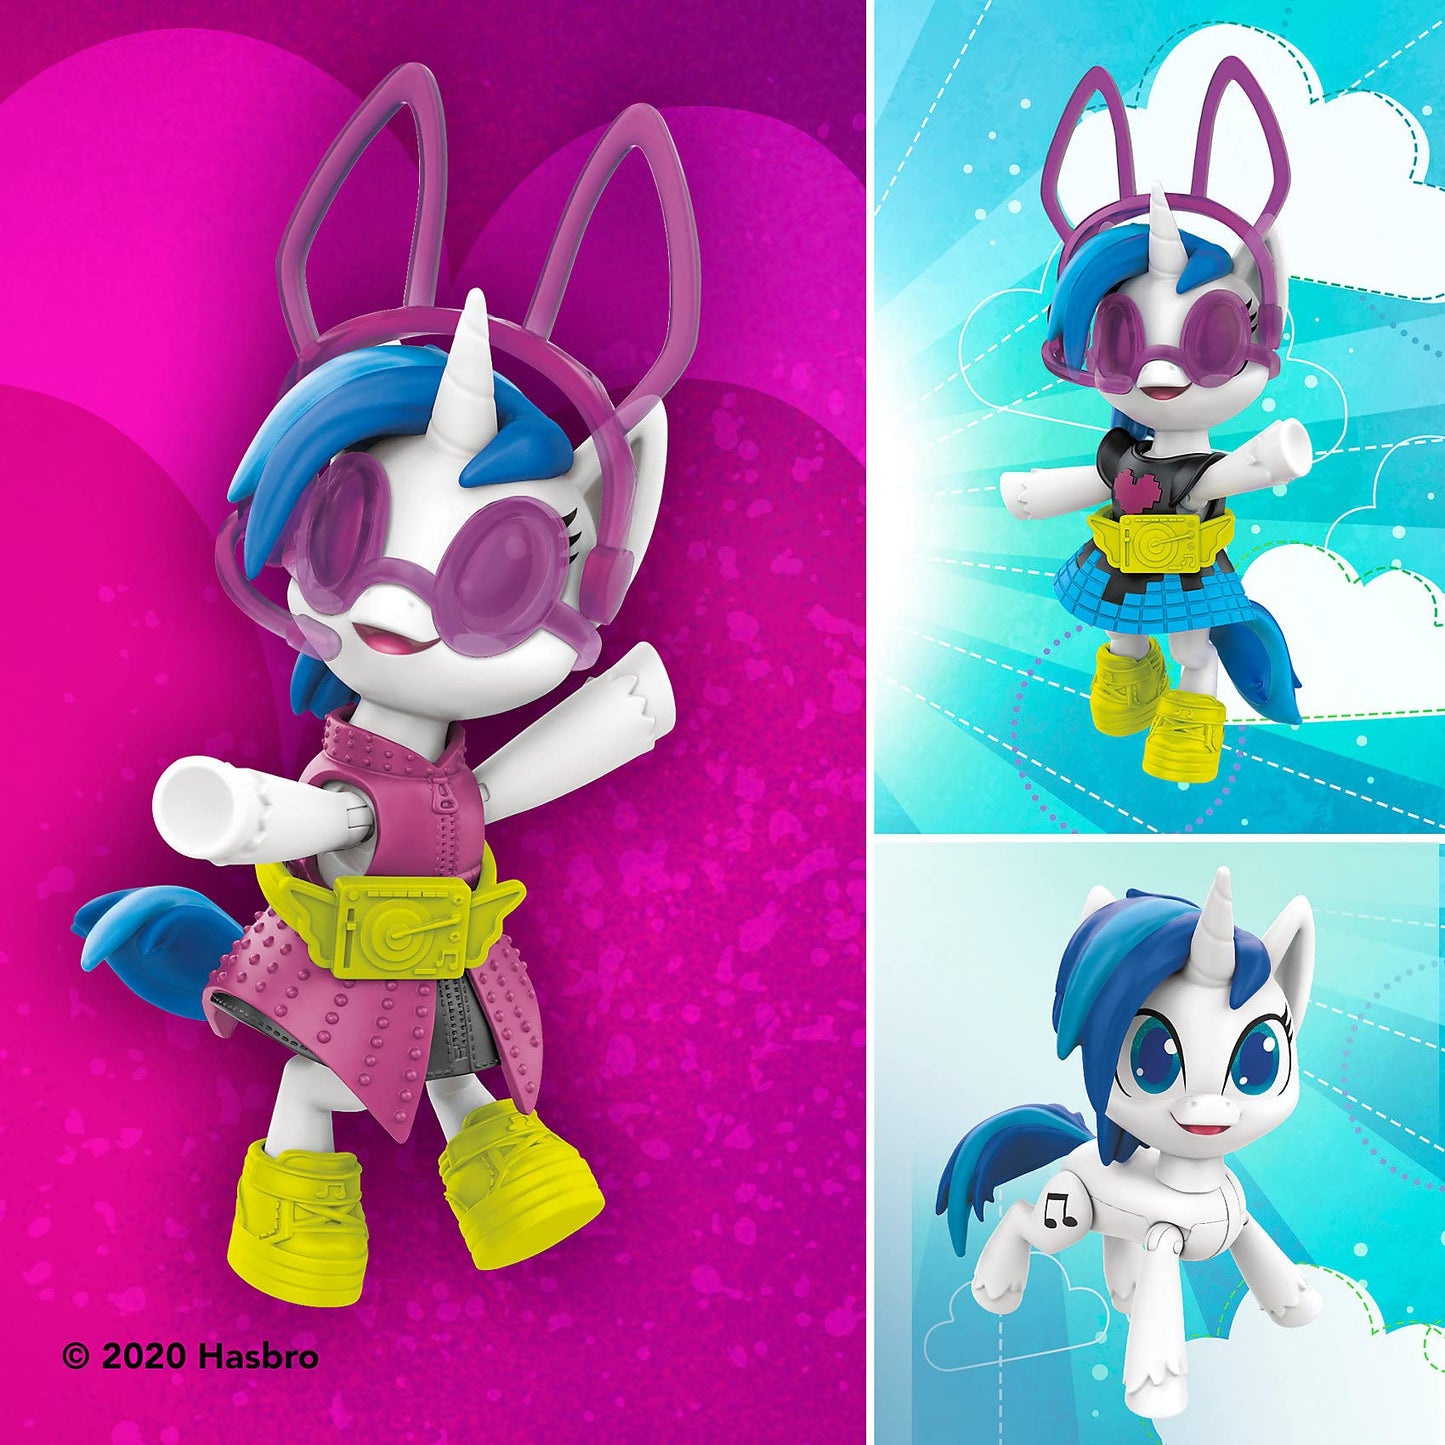 My Little Pony Smashin Fashion Party 2-Pack -- 30 Pieces, Pinkie Pie and DJ Pon-3 Poseable Figures and Surprise Fashion Toy Accessories